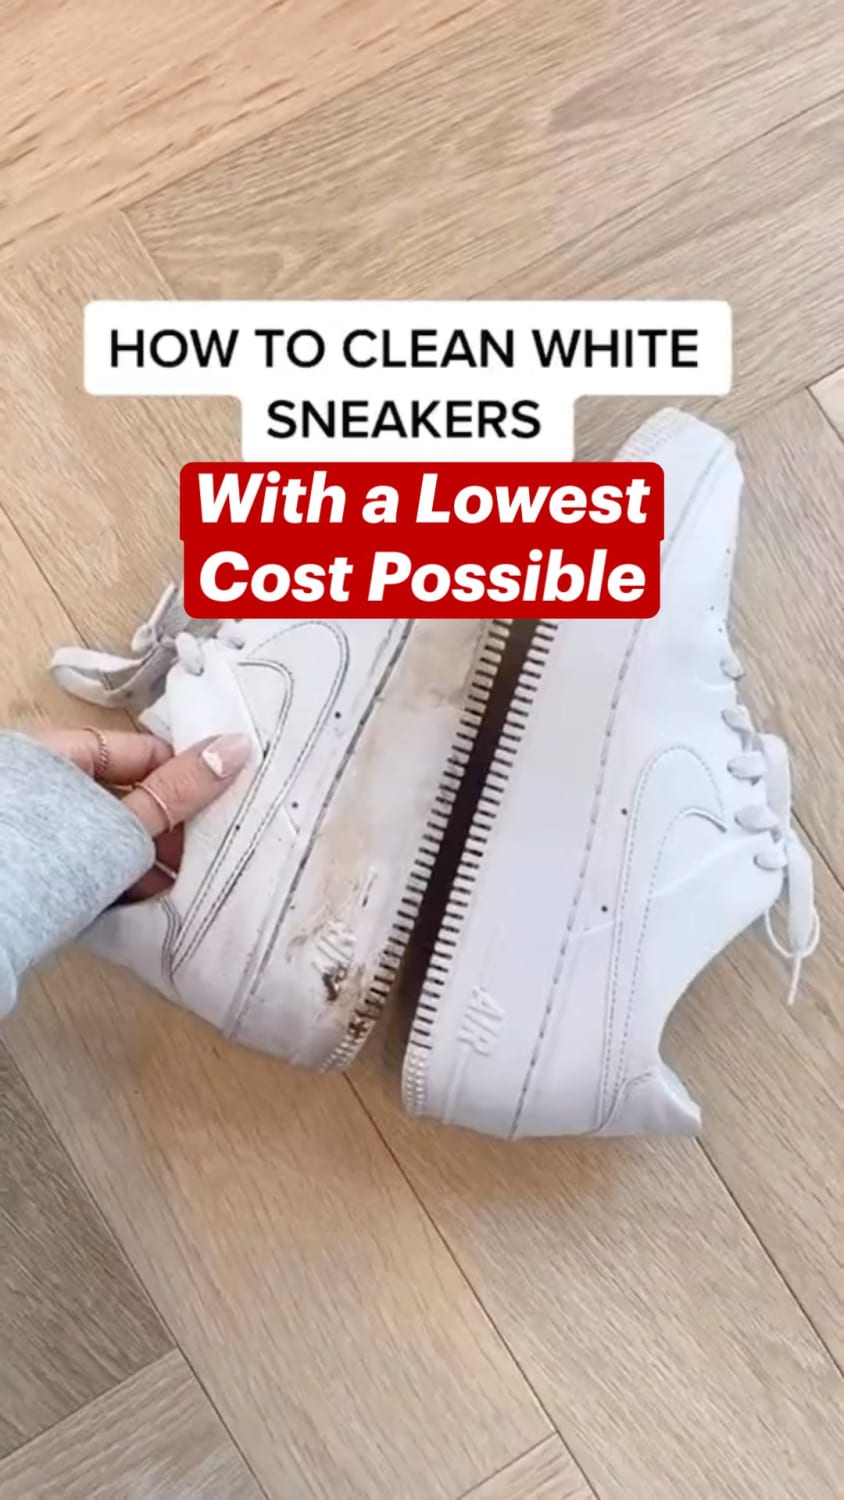 How to clean your sneakers with a lowest cost possible.